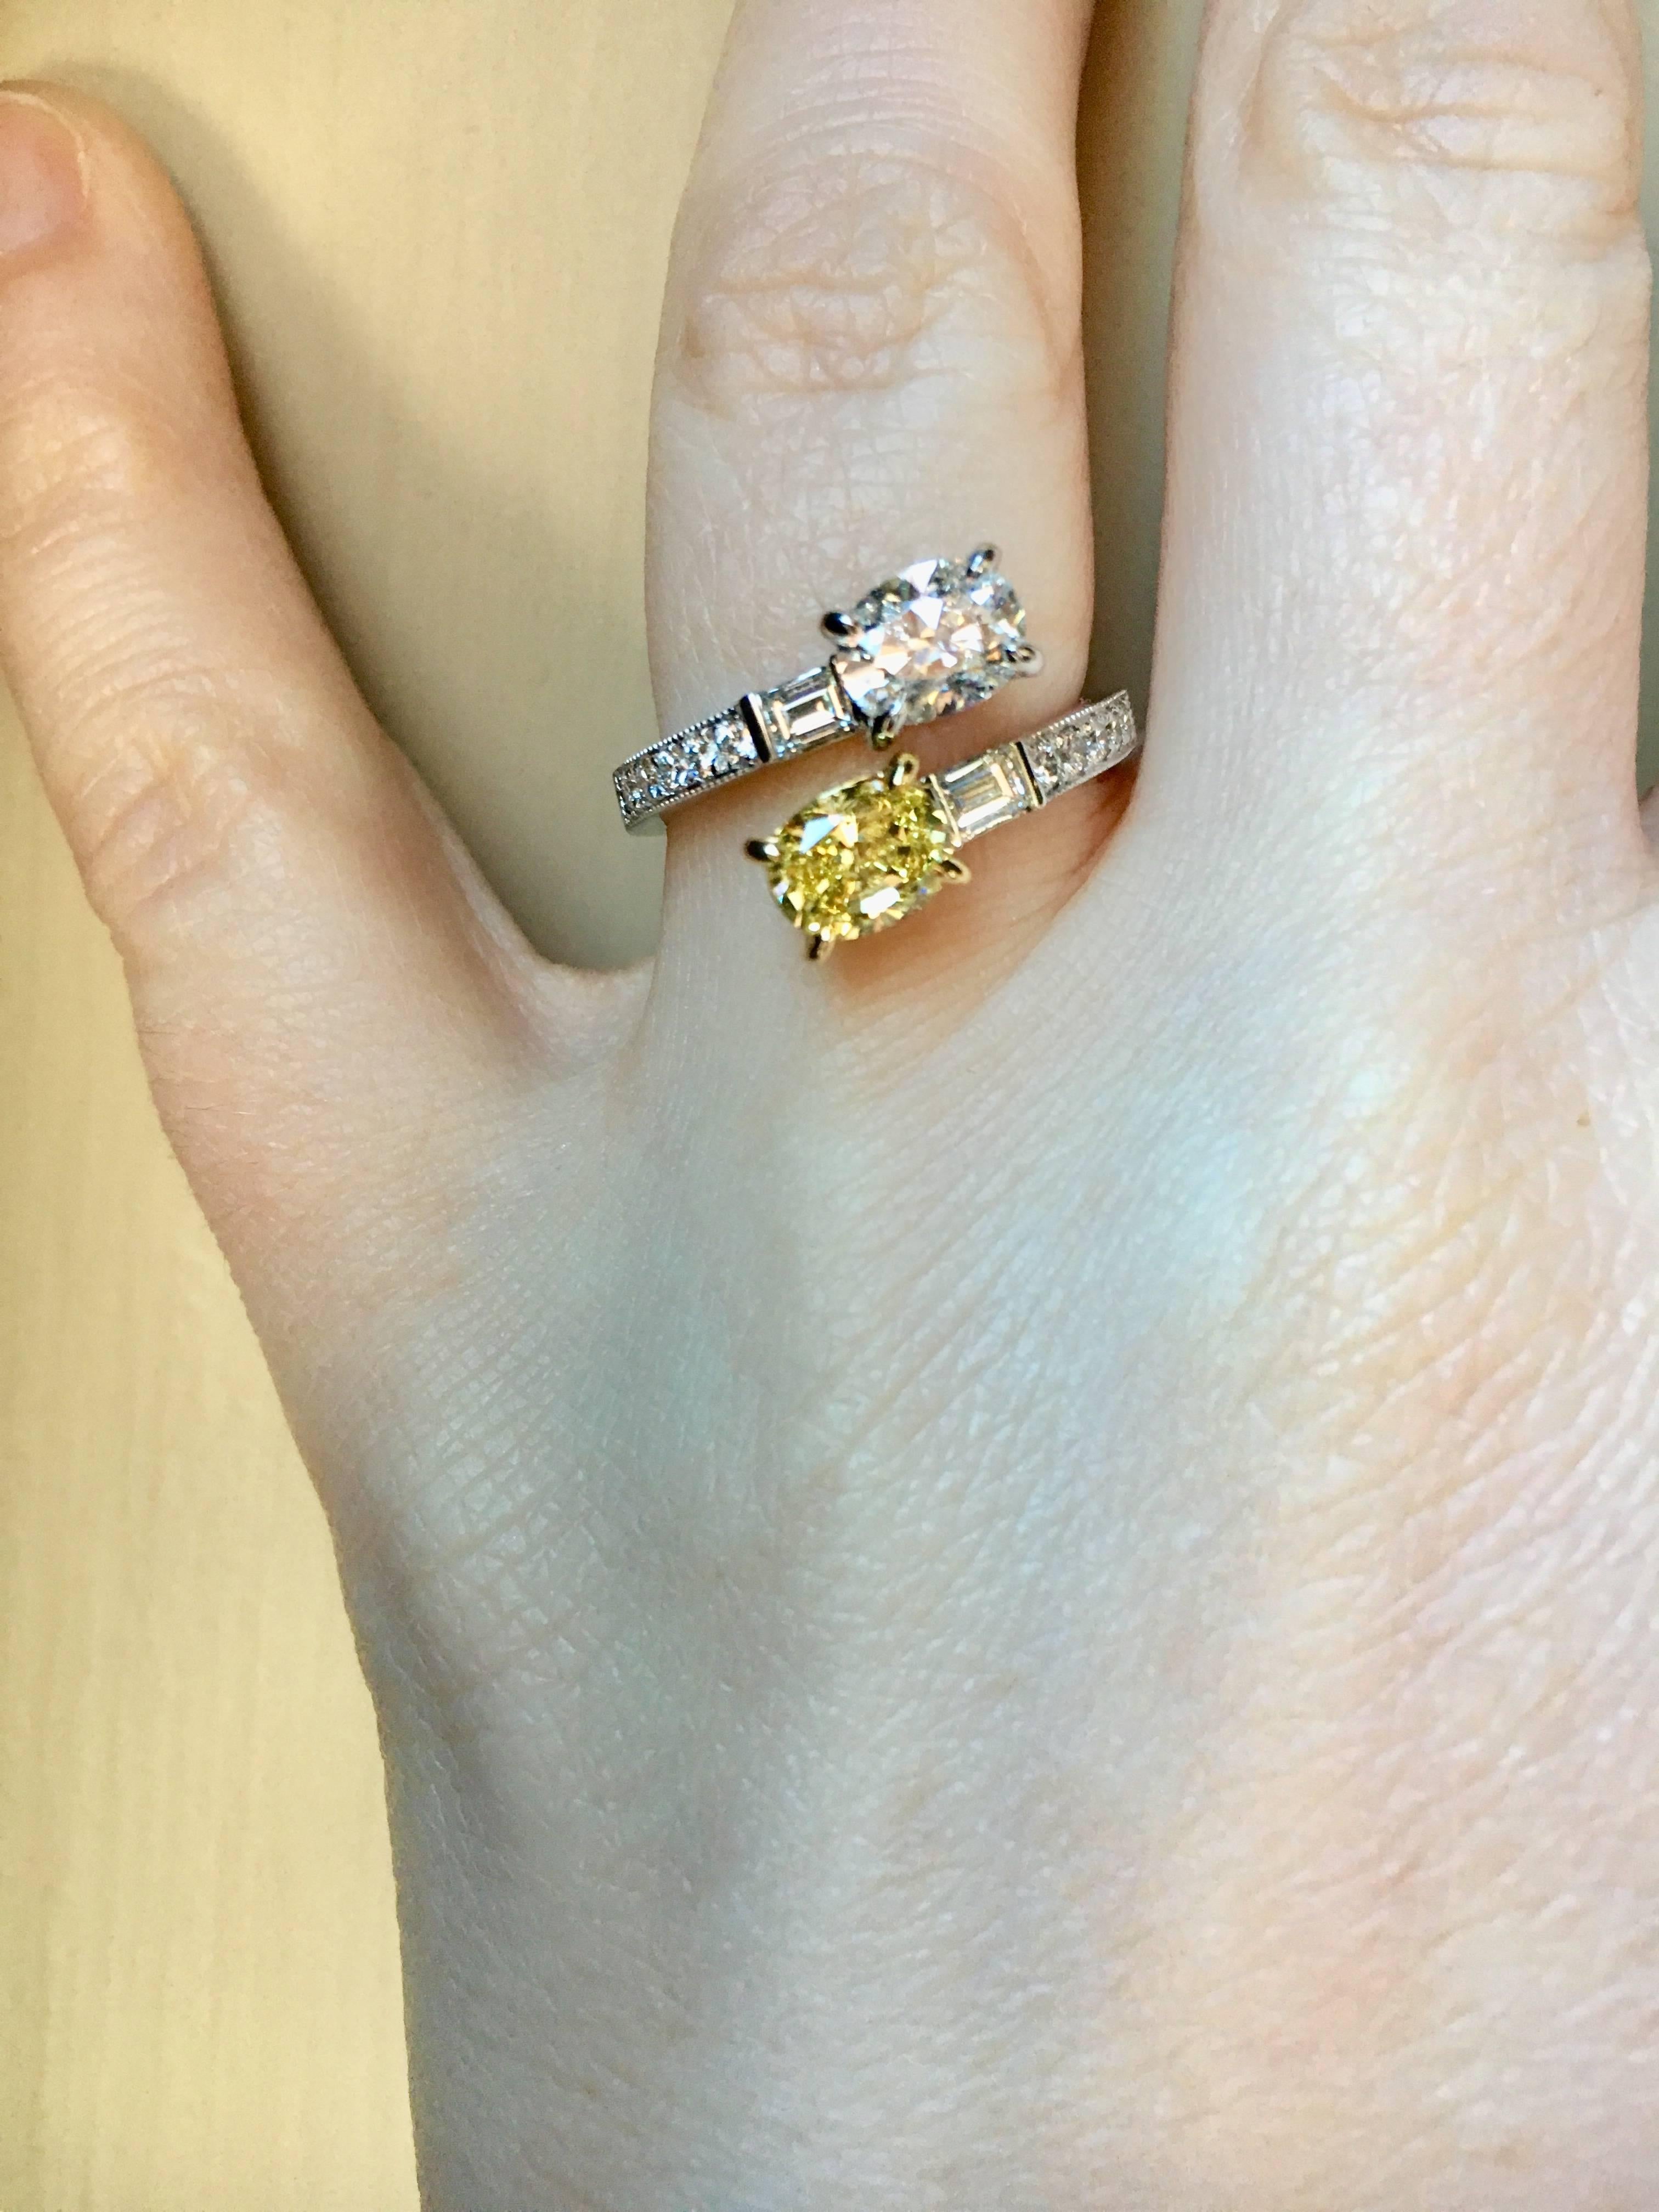 One Fancy Platinum Swirl Yellow and White Oval Diamond Ring In New Condition For Sale In Ottawa, Ontario